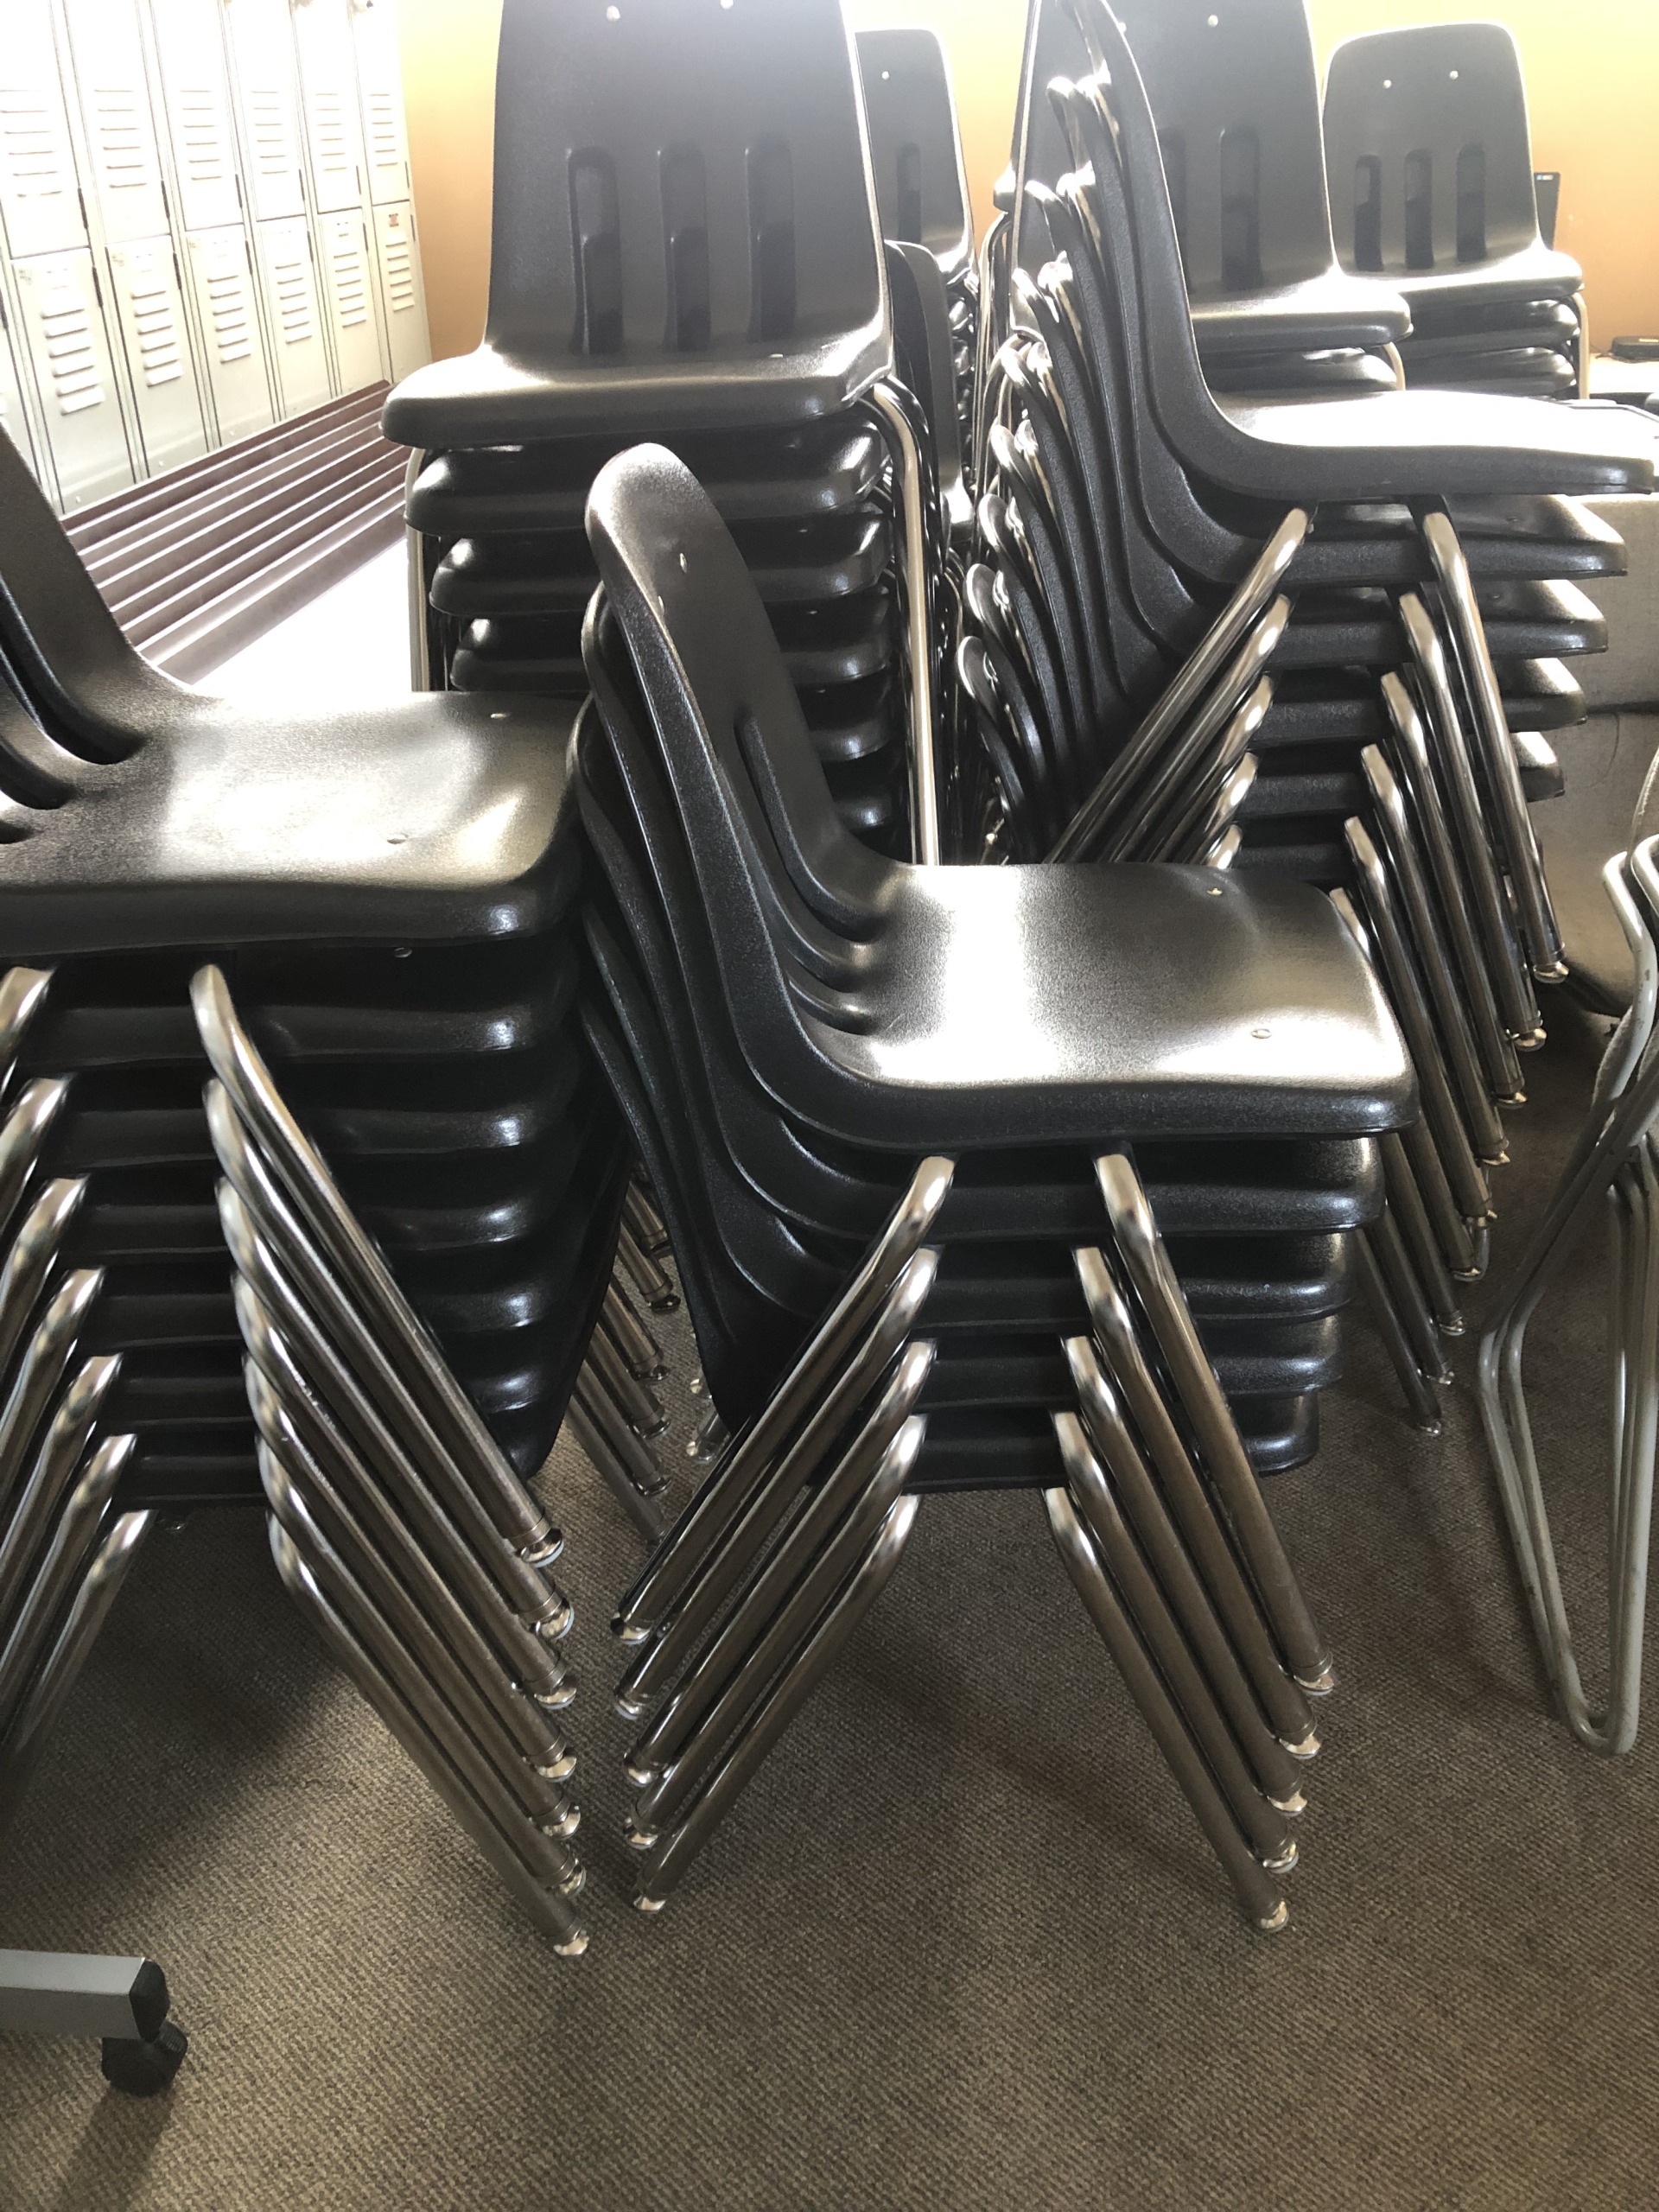 Photo of the chairs that are for sale